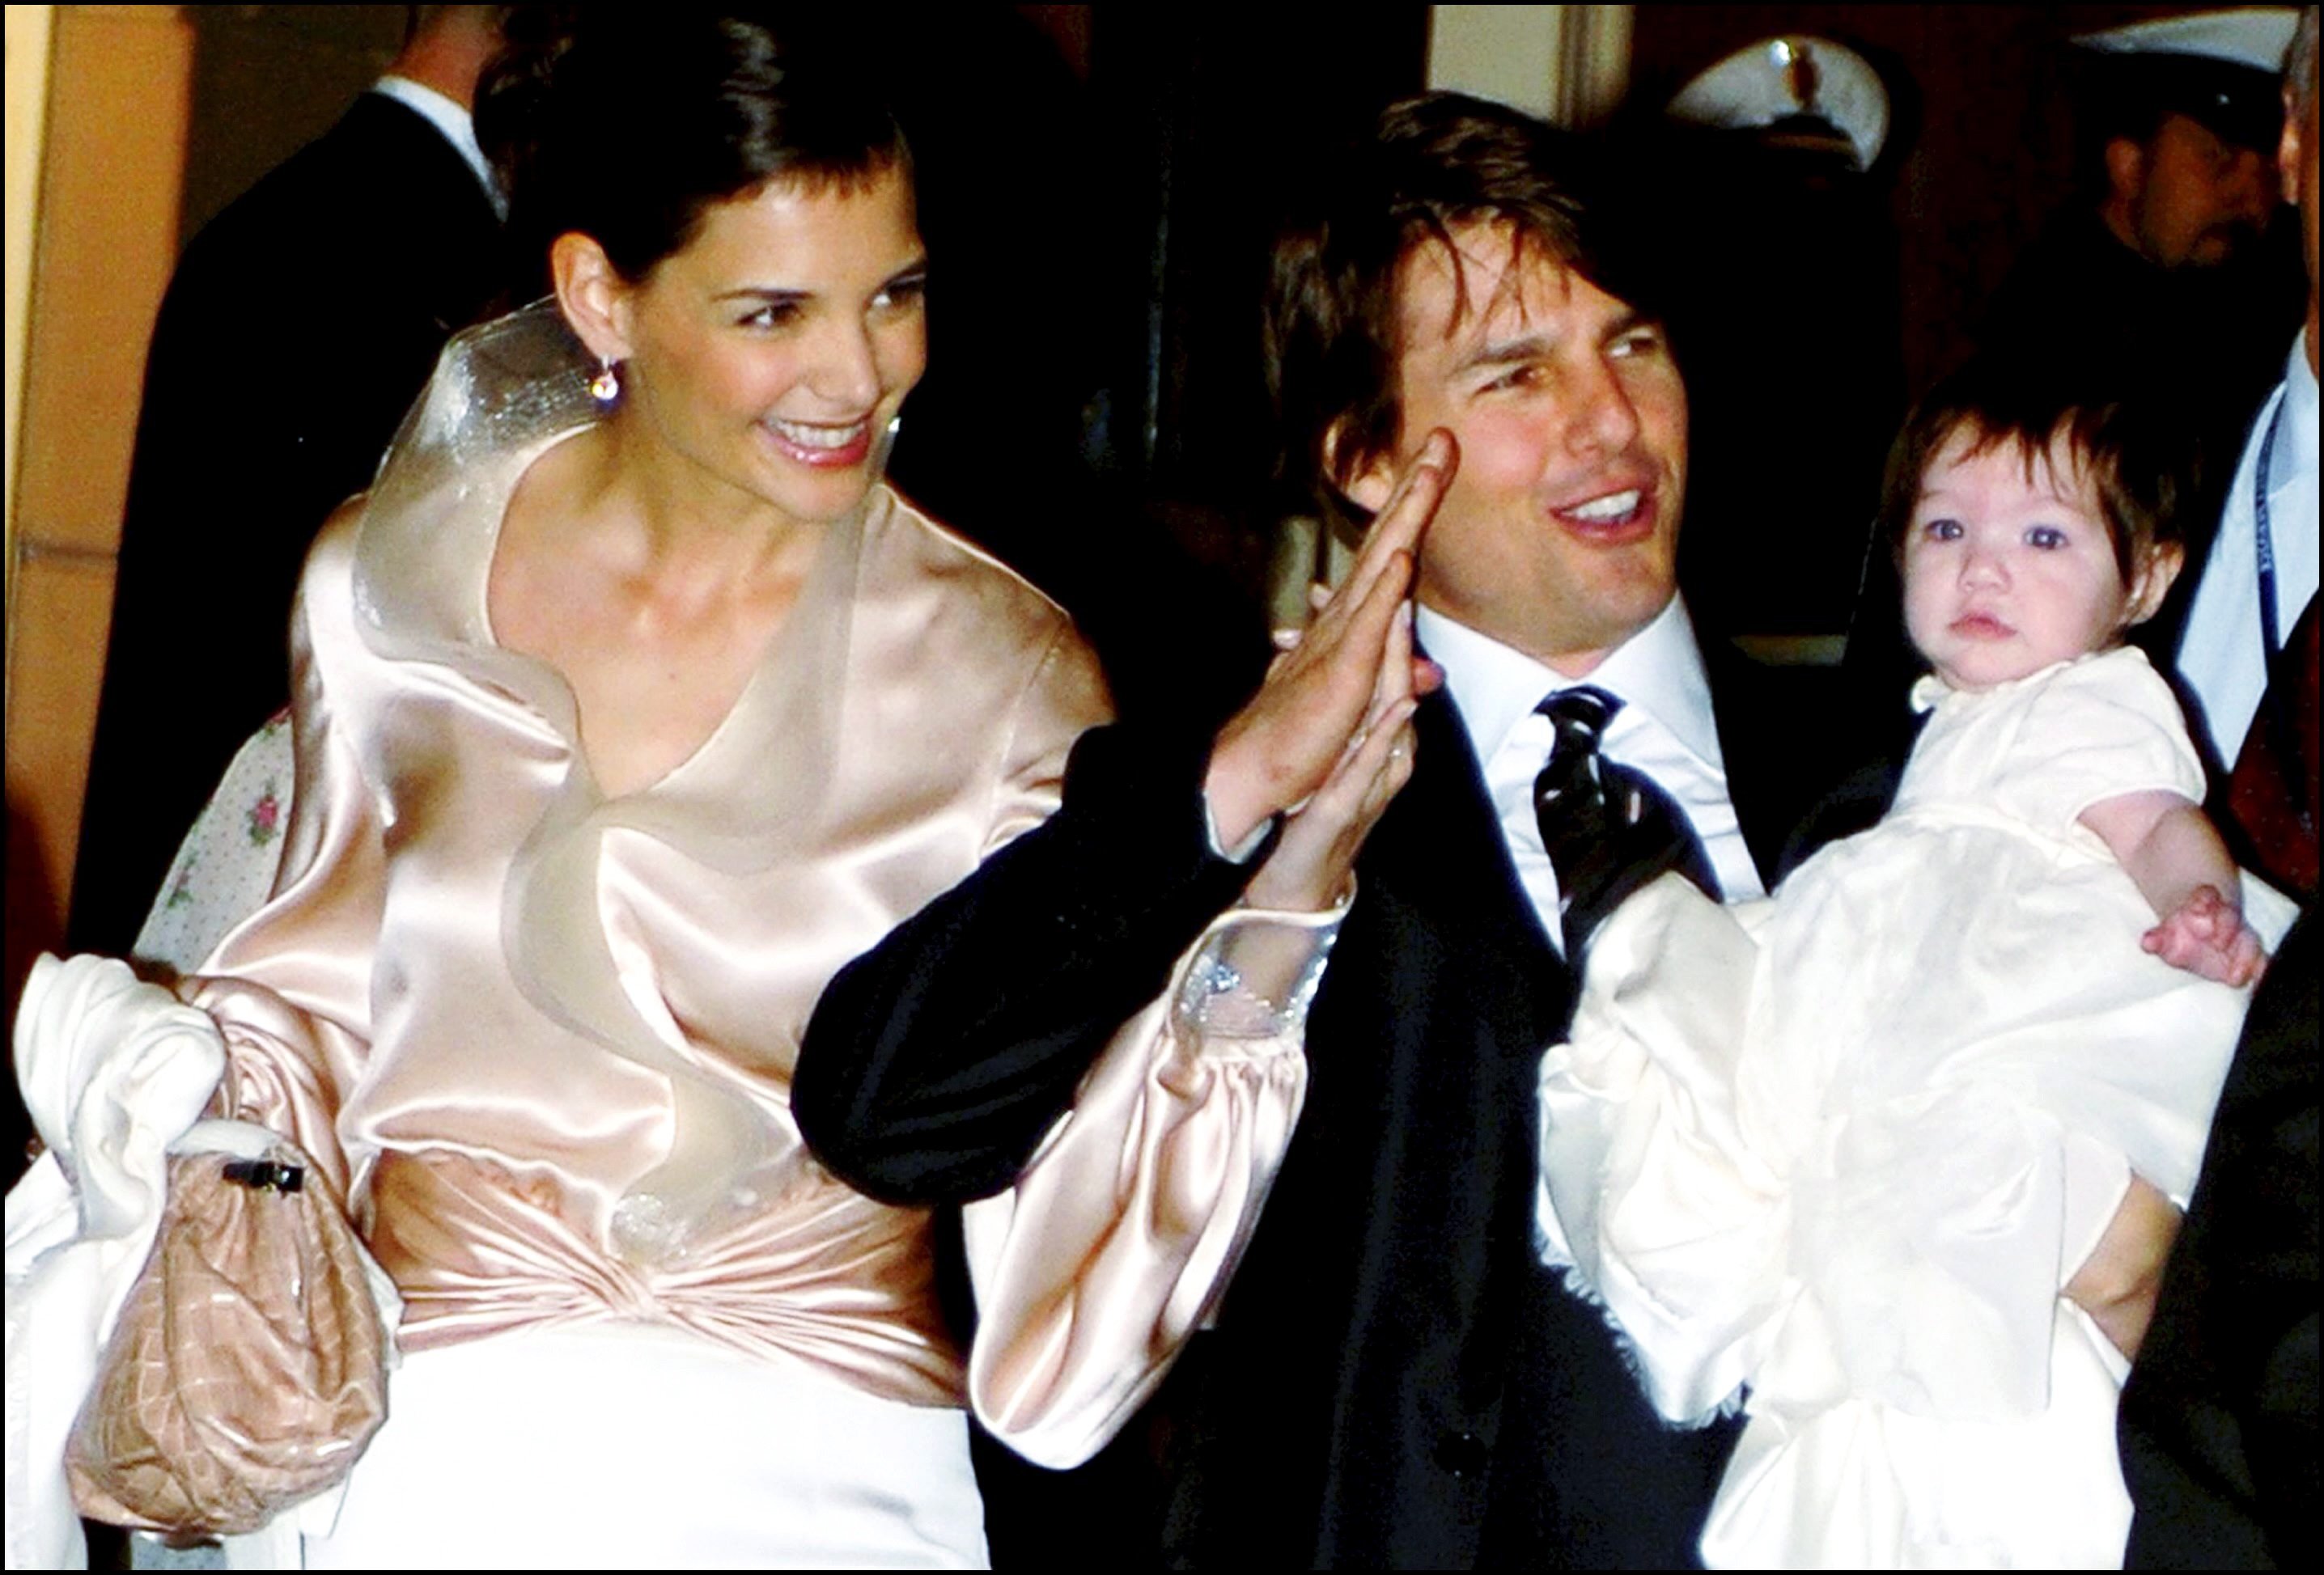 Tom Cruise and Katie Holmes with their daughter Suri arrive at the restaurant 'Nino' near plaza di Spagna, in Rome, Italy on November 16, 2006 | Source: Getty Images